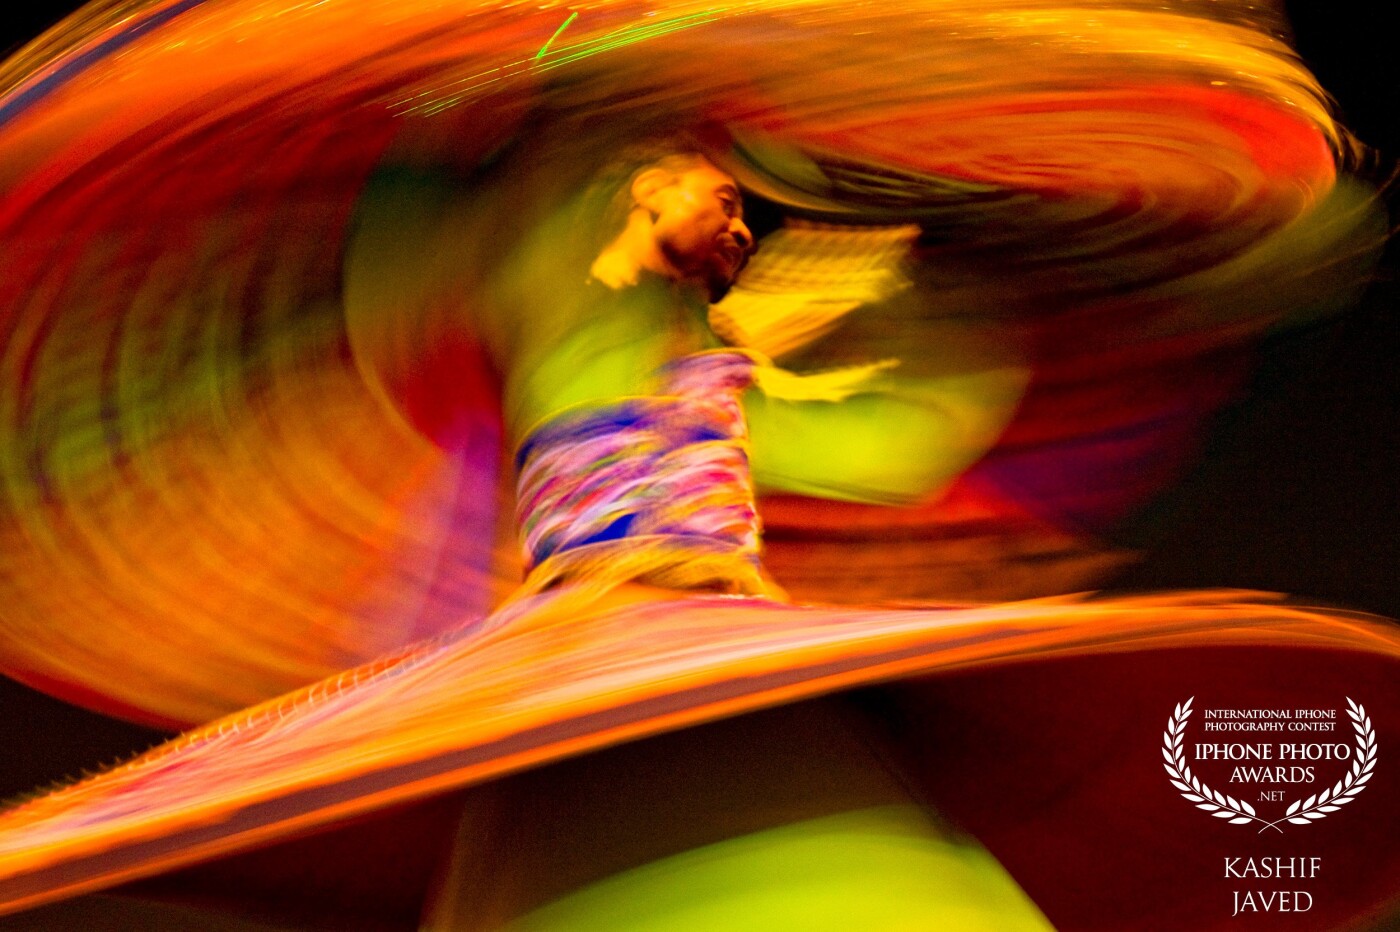 I took this photo at a festival in Dubai, skills of this Egyptian dancer along with his colorful costume were amazing. I was lucky to find a good viewing point to capture this beautiful moment. 'Compromise in colors is grey.’ ― Edi Rama